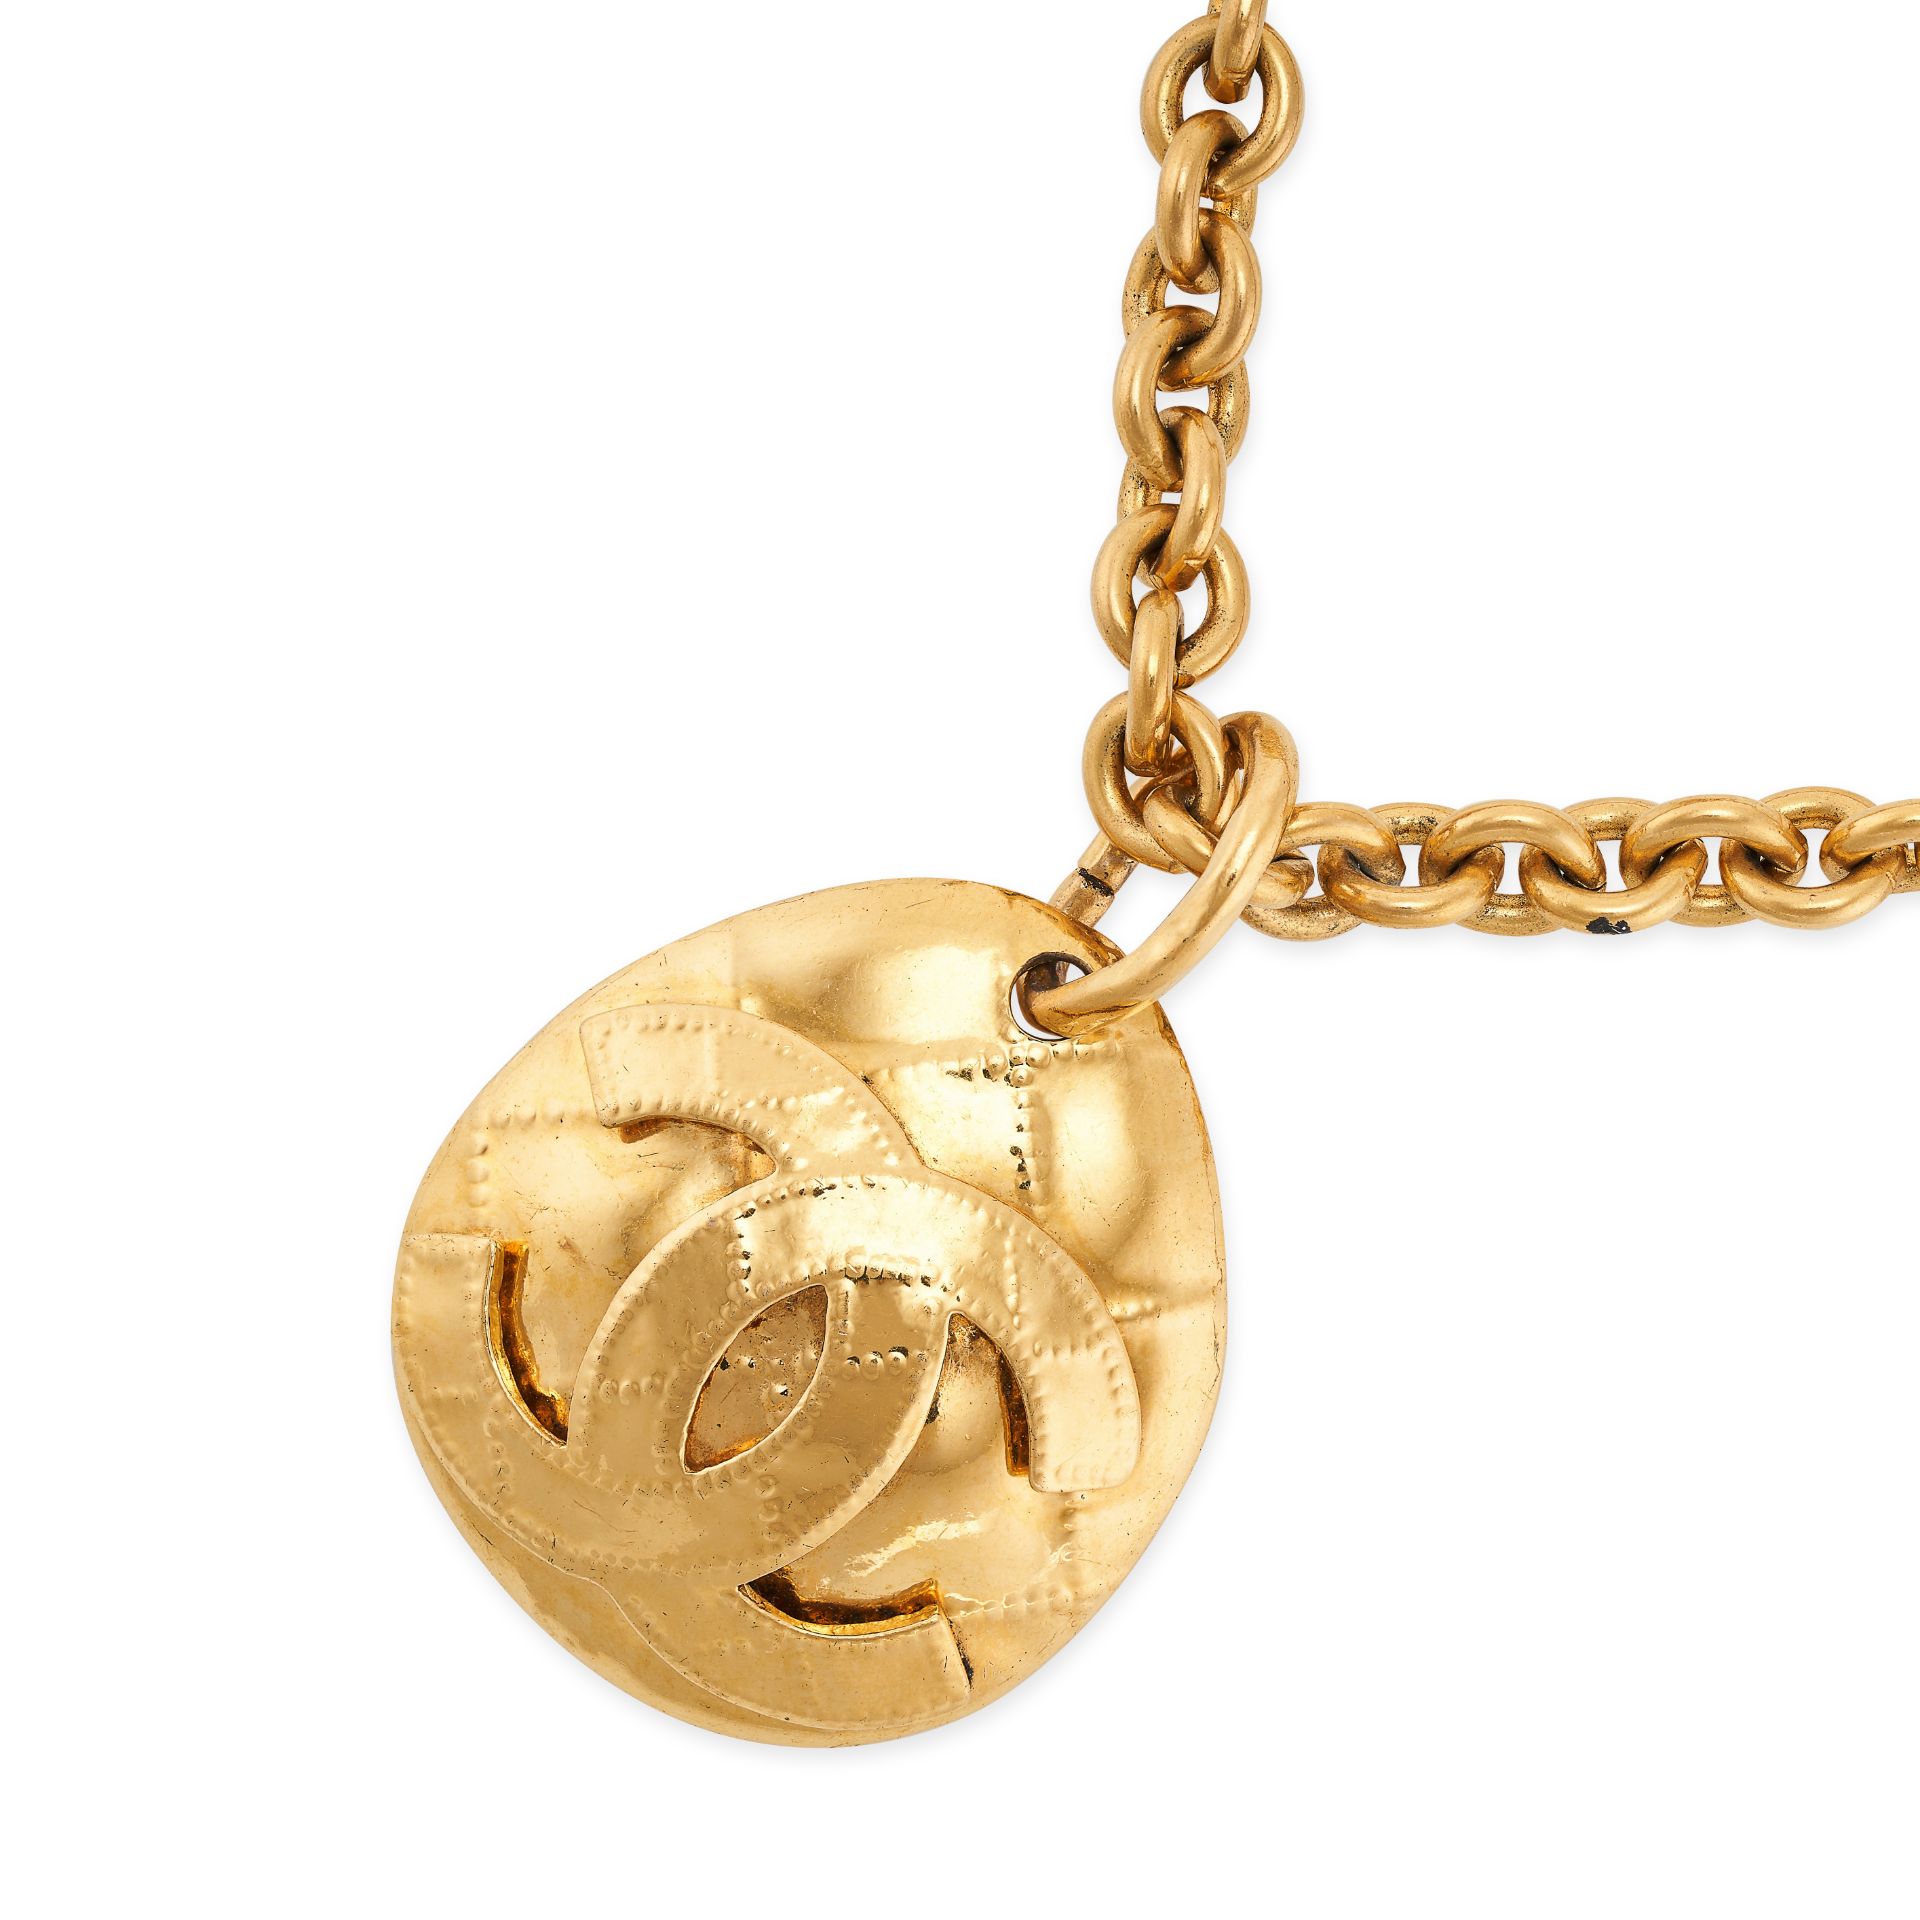 NO RESERVE CHANEL VINTAGE CC PENDANT AND CHAIN - Image 2 of 2